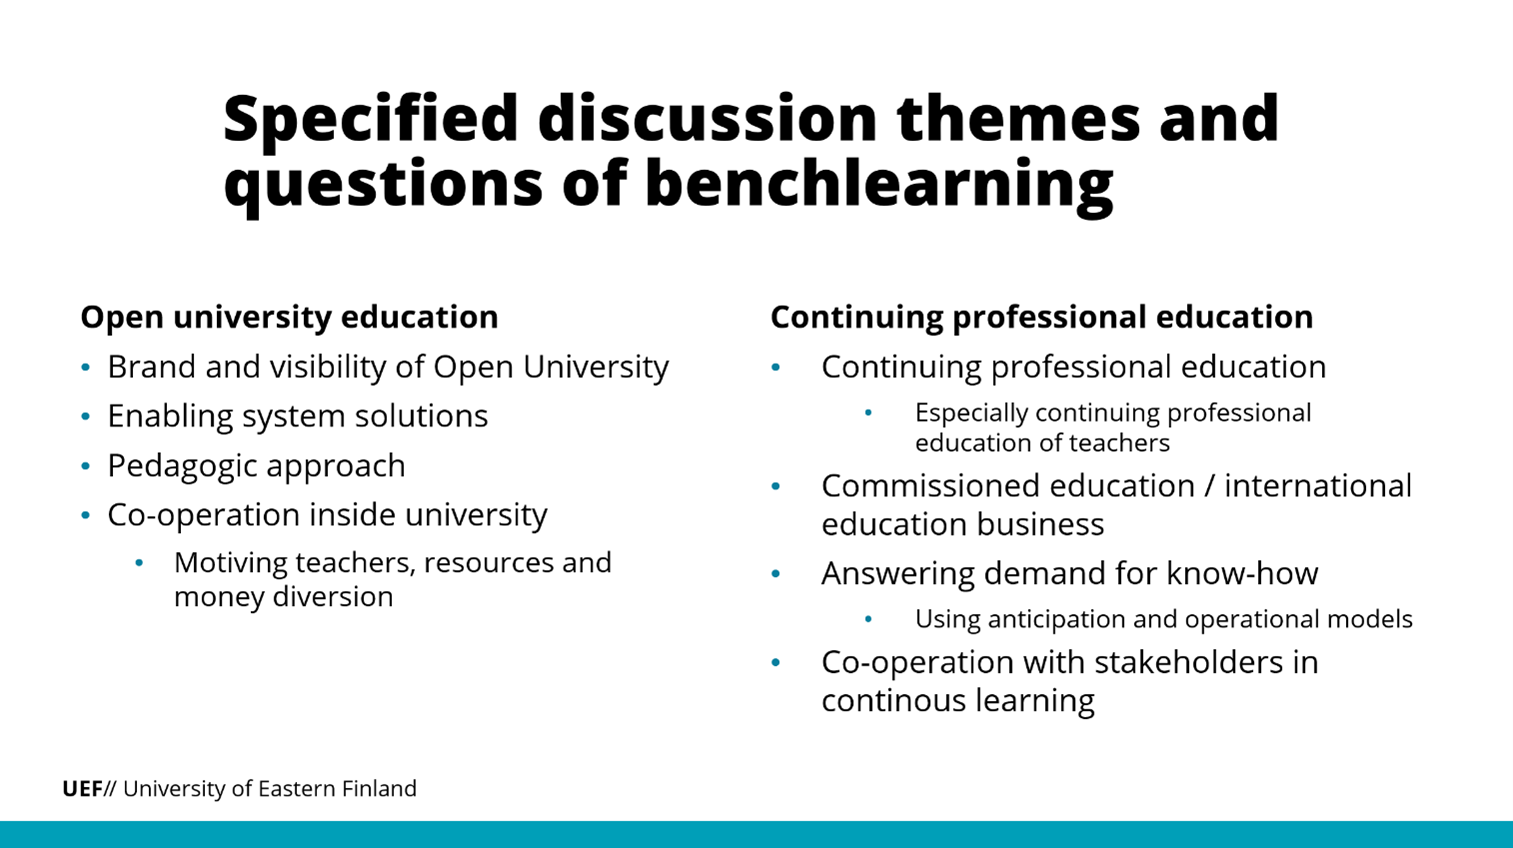 Themes and questions of benchlearning